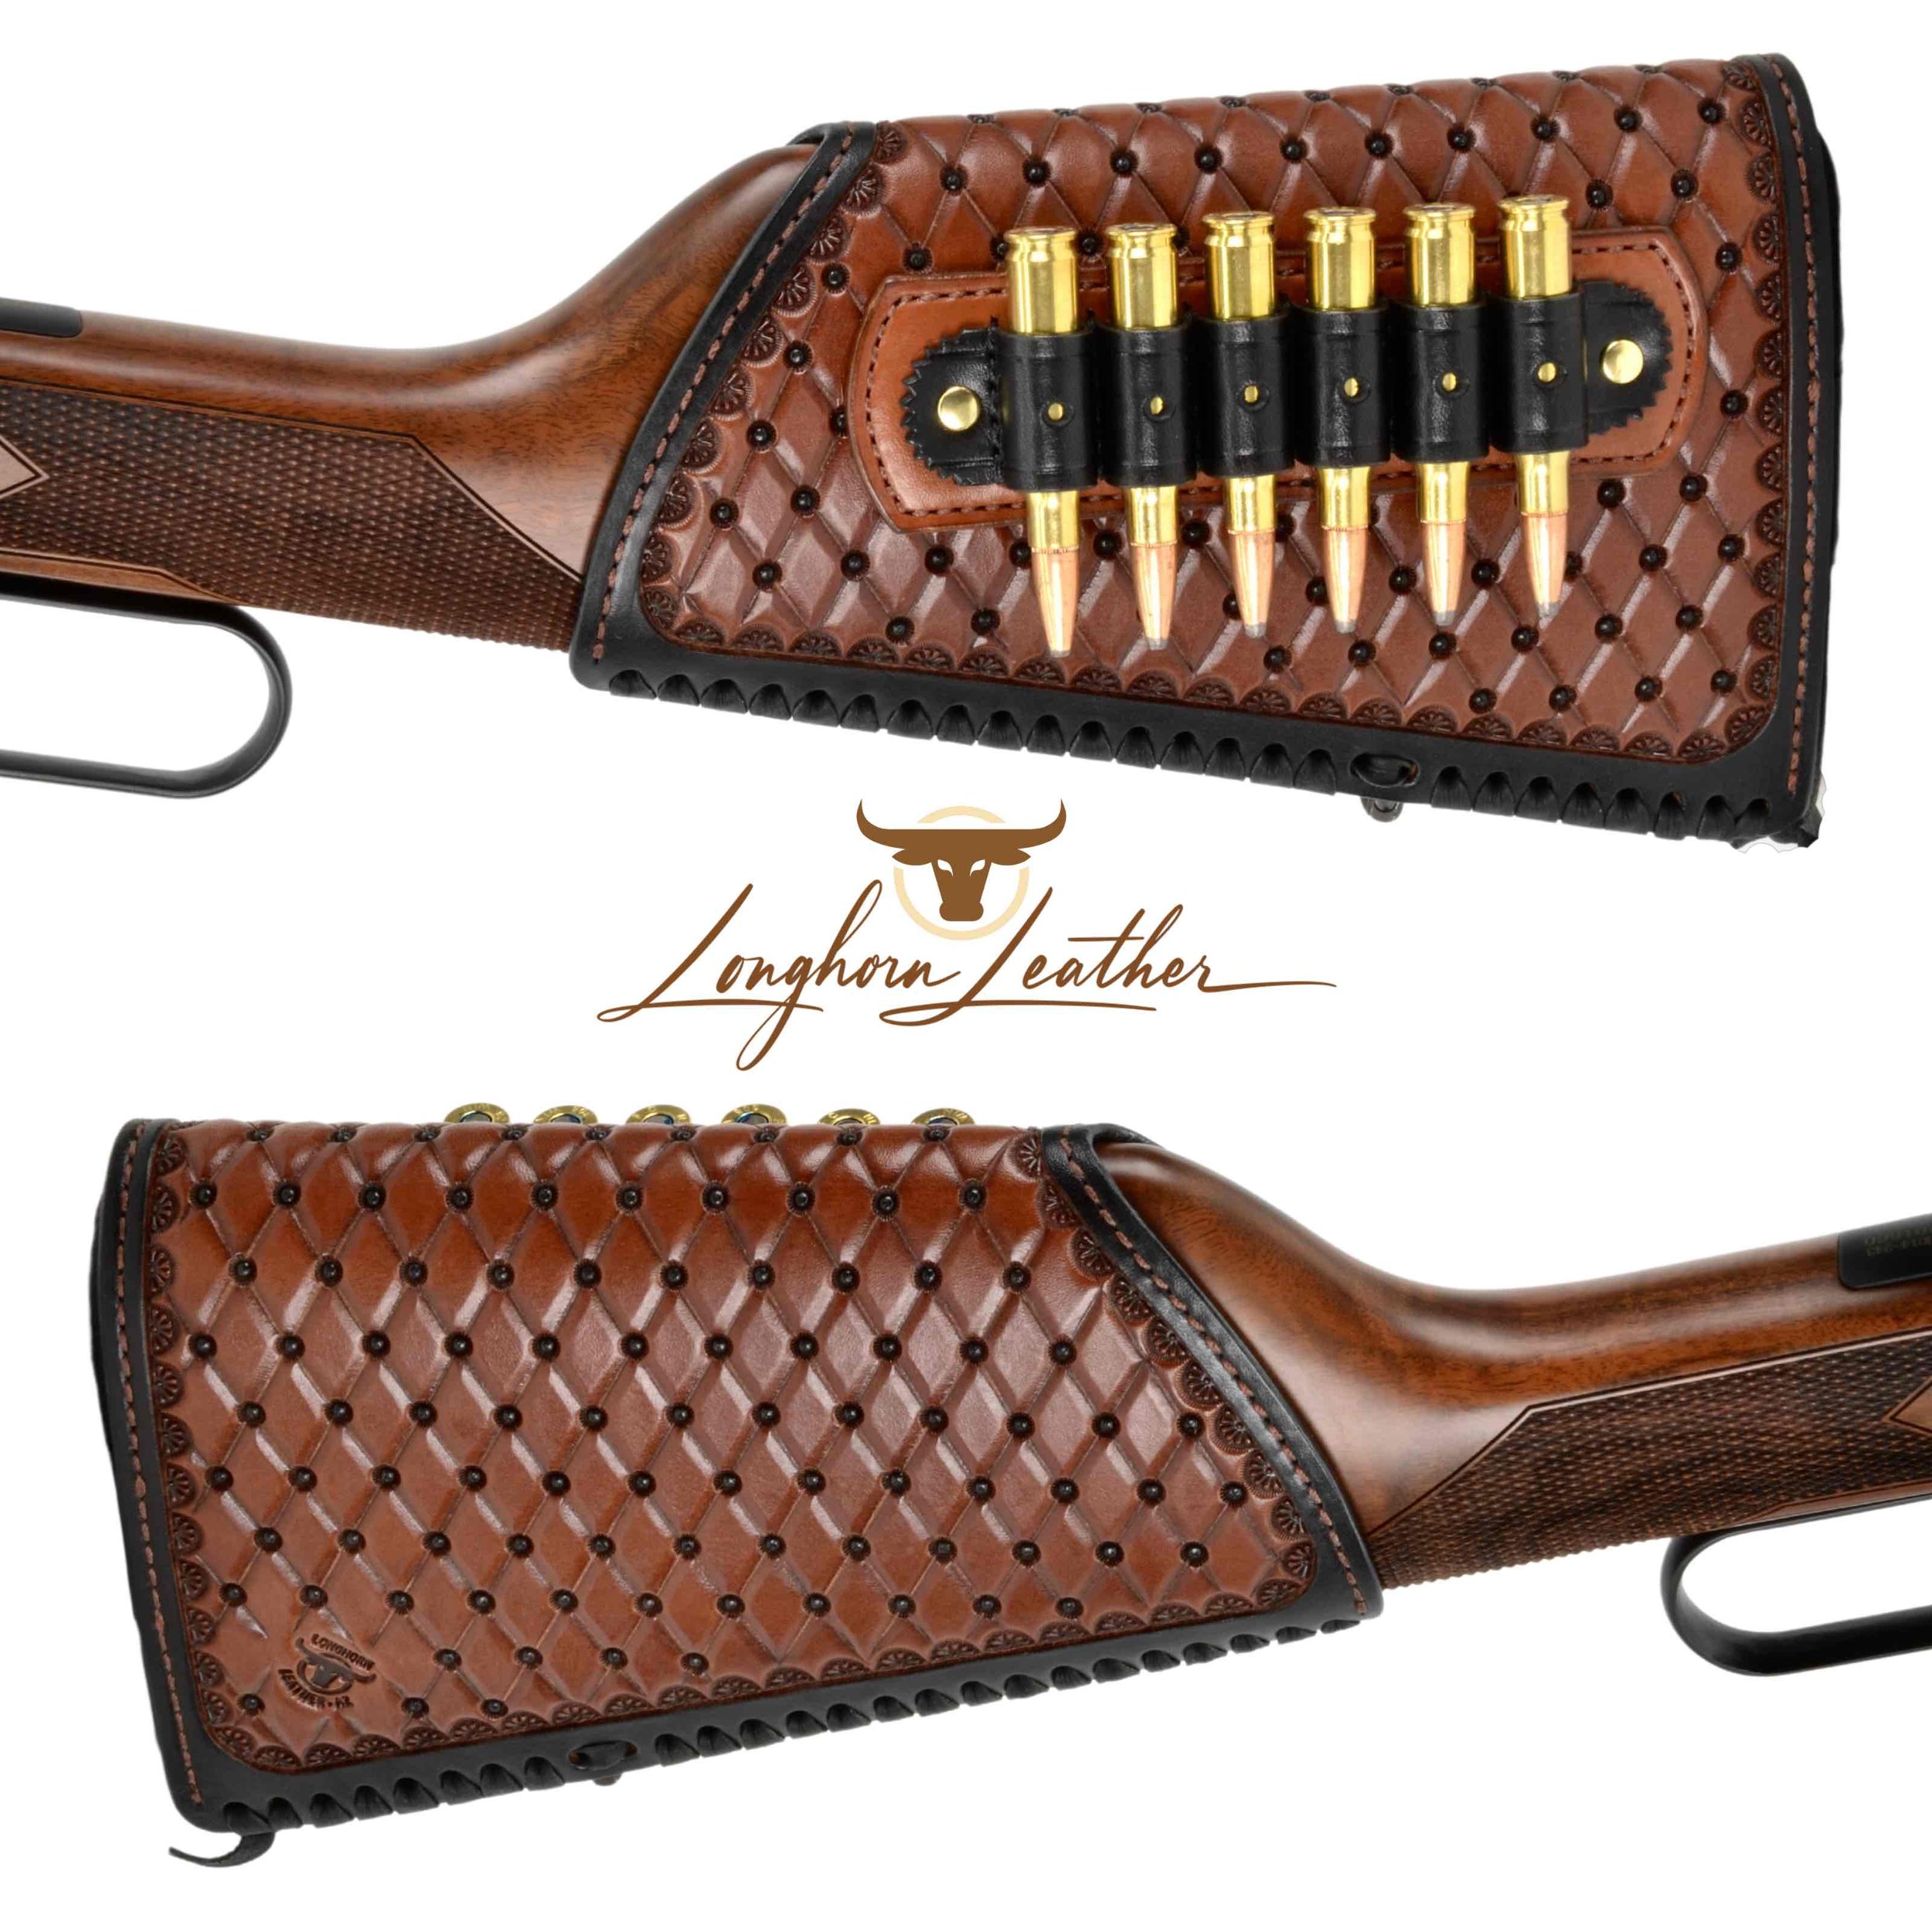 Custom leather gunstock cover featuring the San Carlos design.  Individually handcrafted at Longhorn Leather AZ